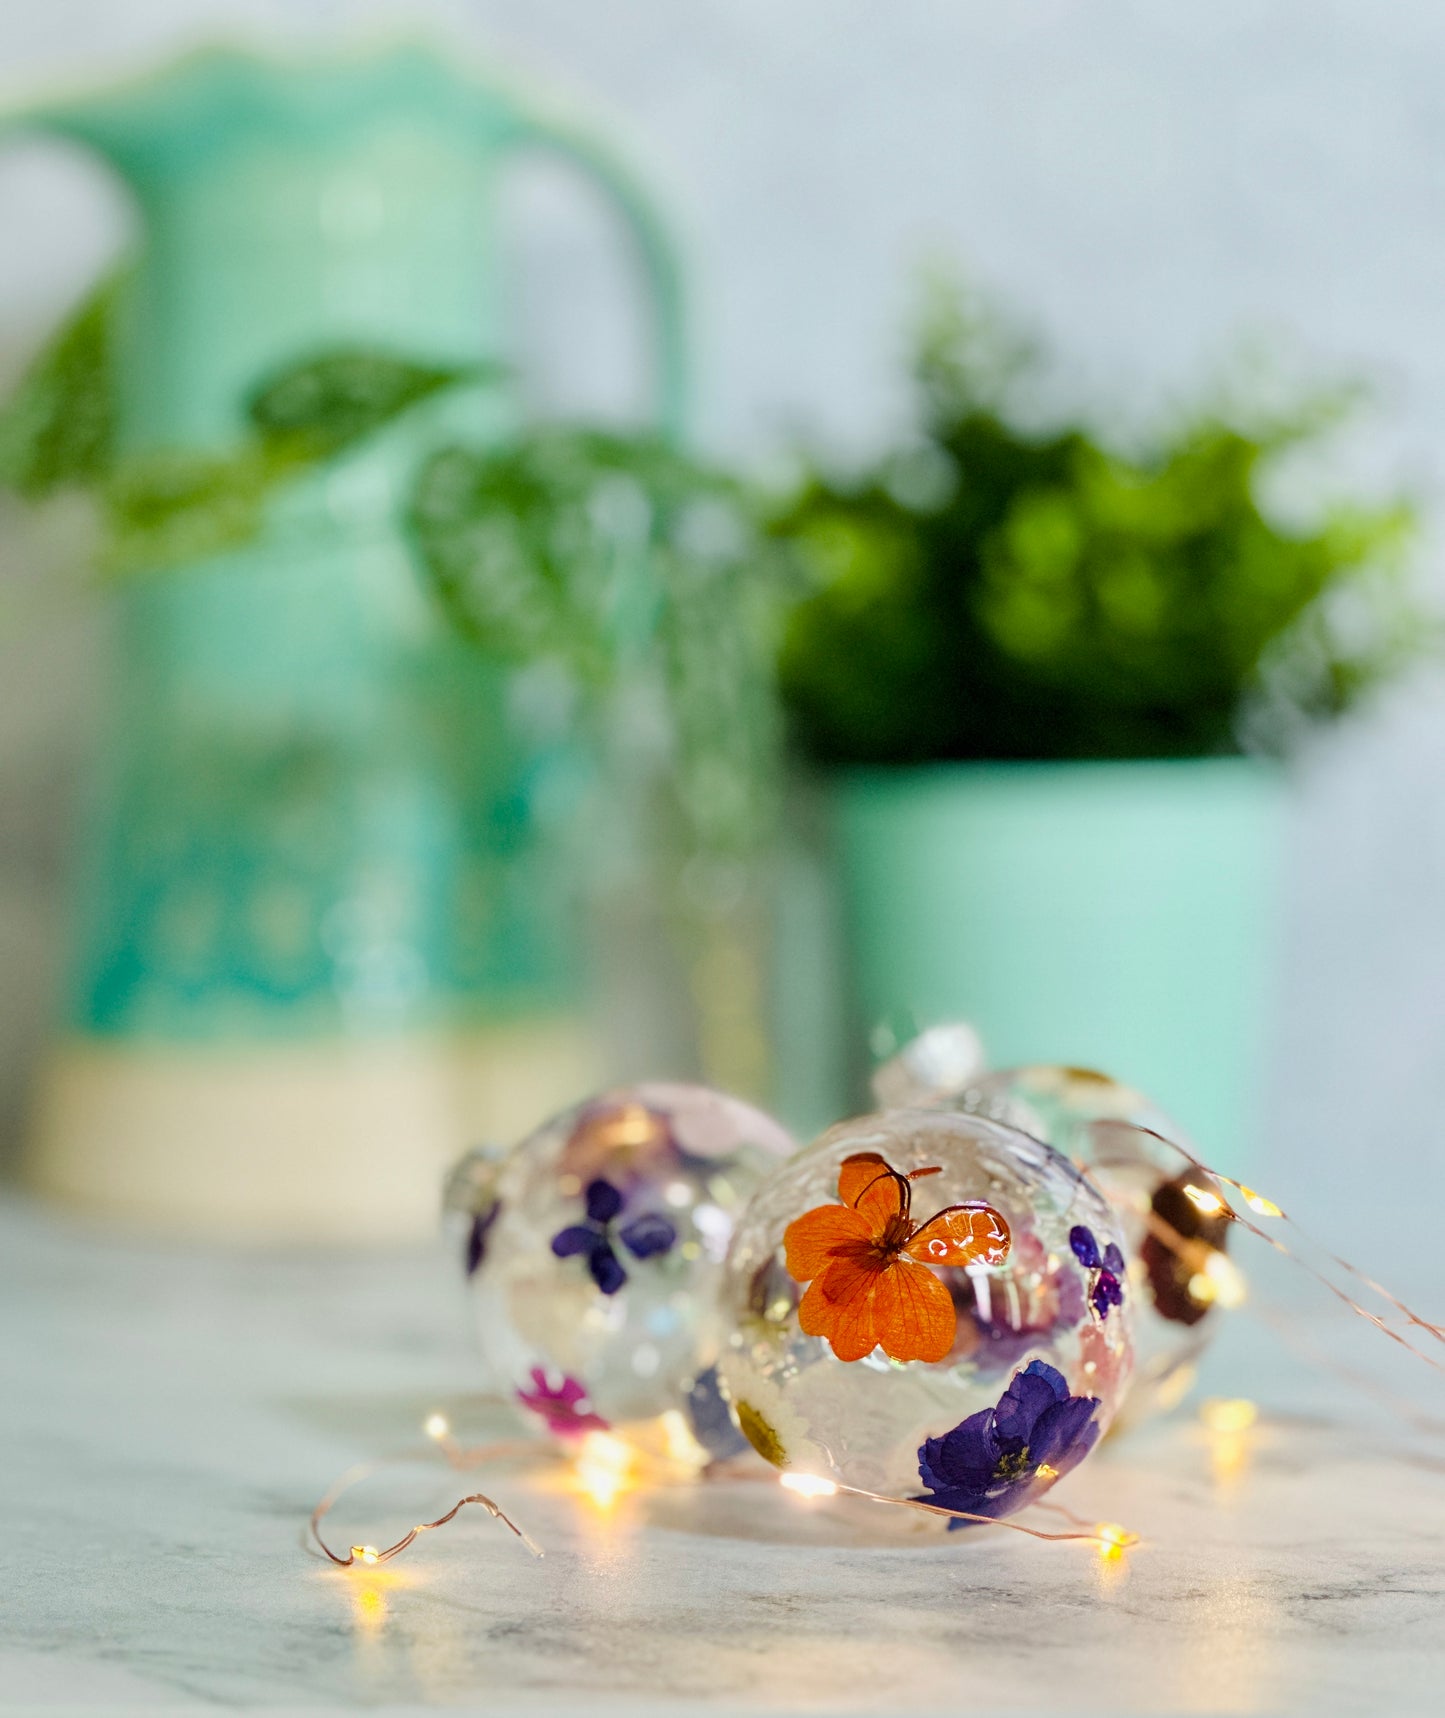 Pressed Flower Bauble Christmas Ornaments - Set of Three